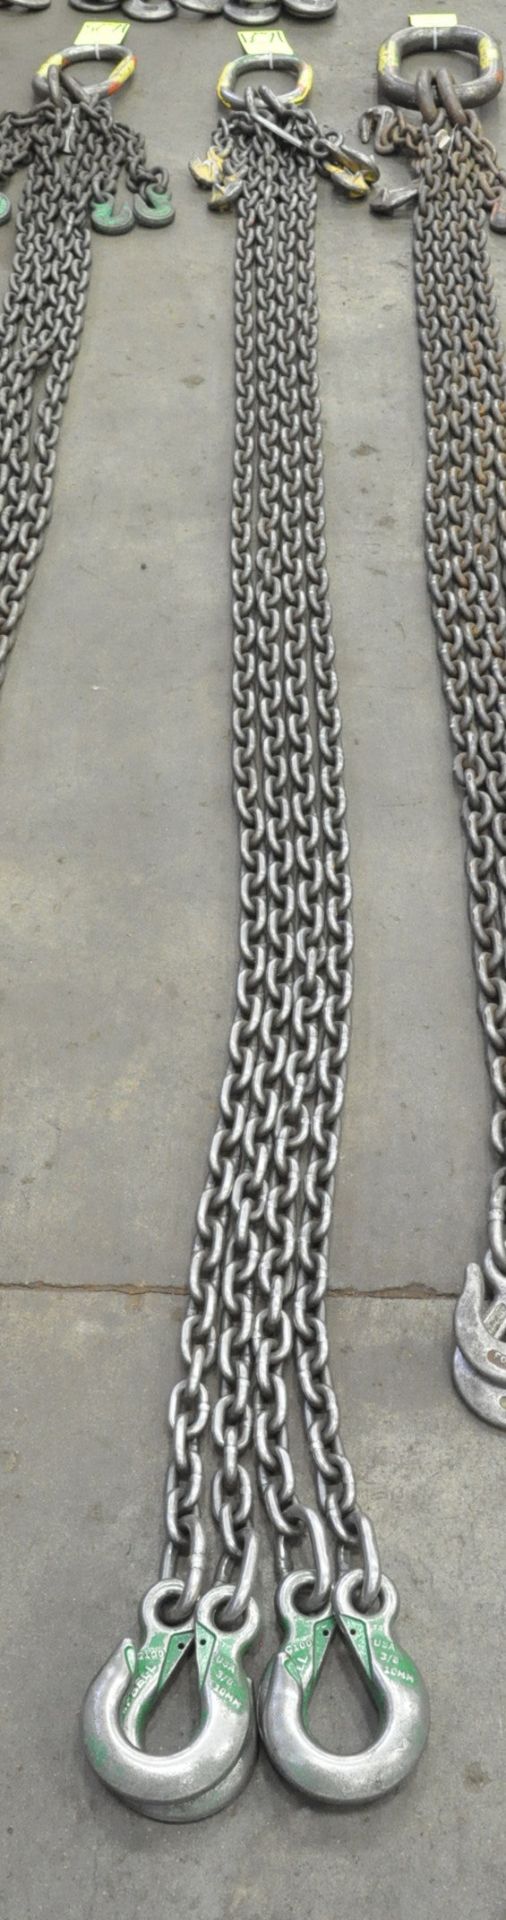 3/8" Link x 9' Long 4-Hook Chain Sling with (4) Chokers, Cert Tag, (G-23), (Yellow Tag) - Image 2 of 2